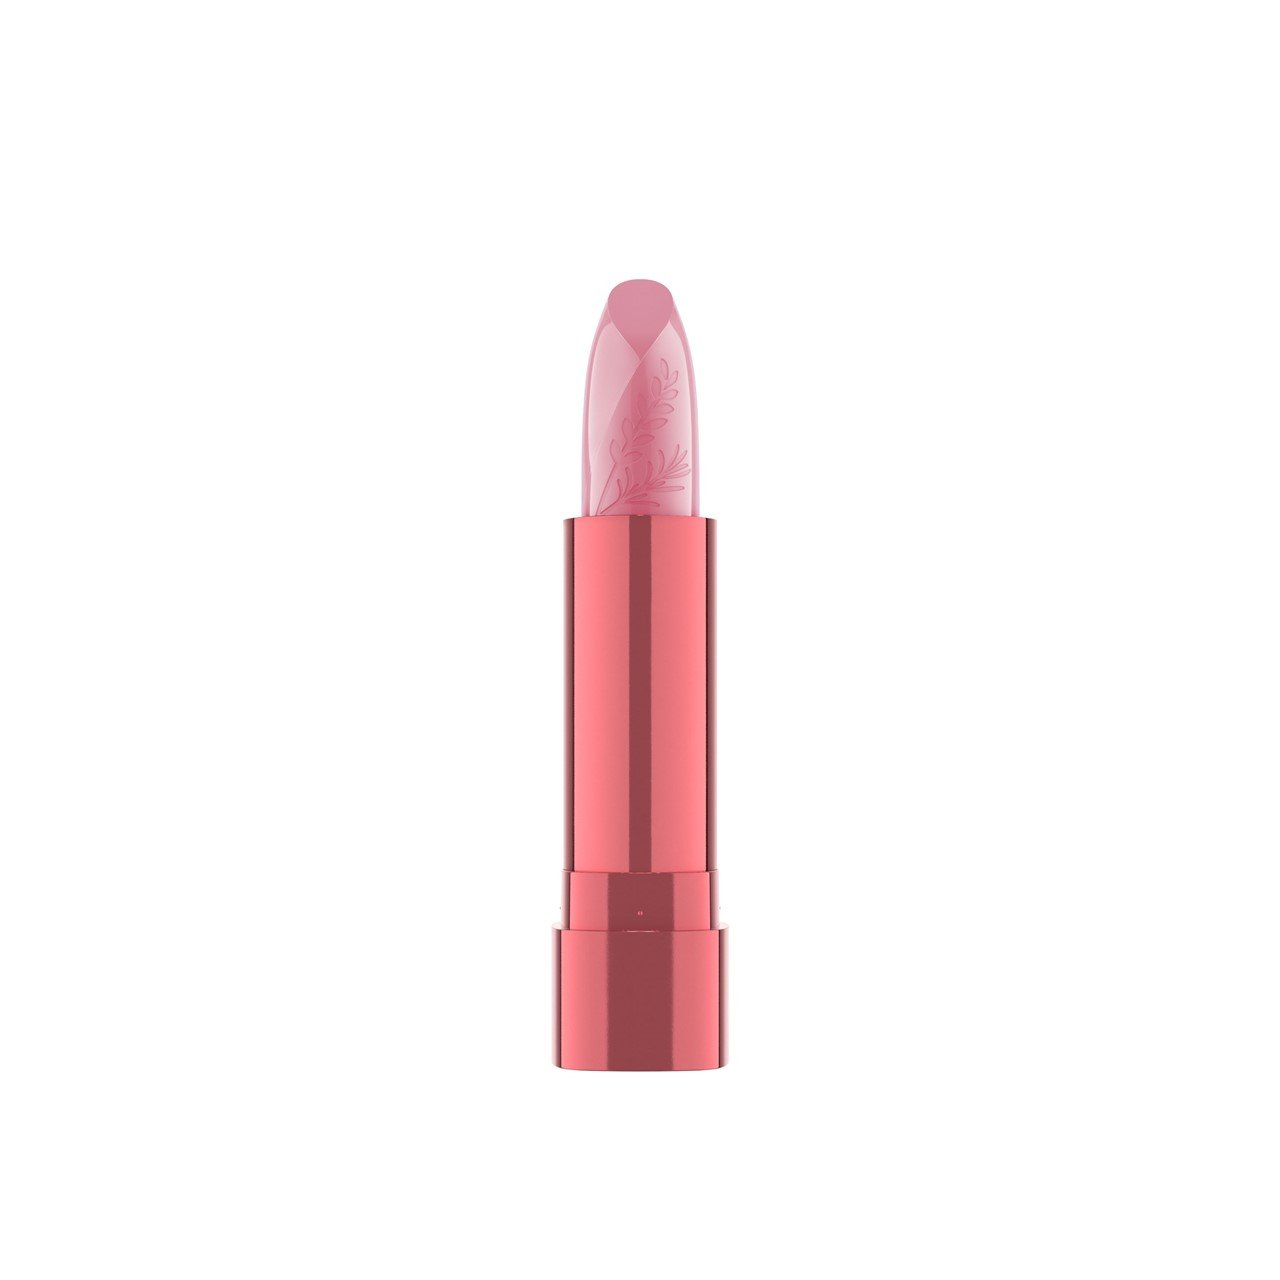 Catrice Flower & Herb Edition Power Plumping Gel Lipstick